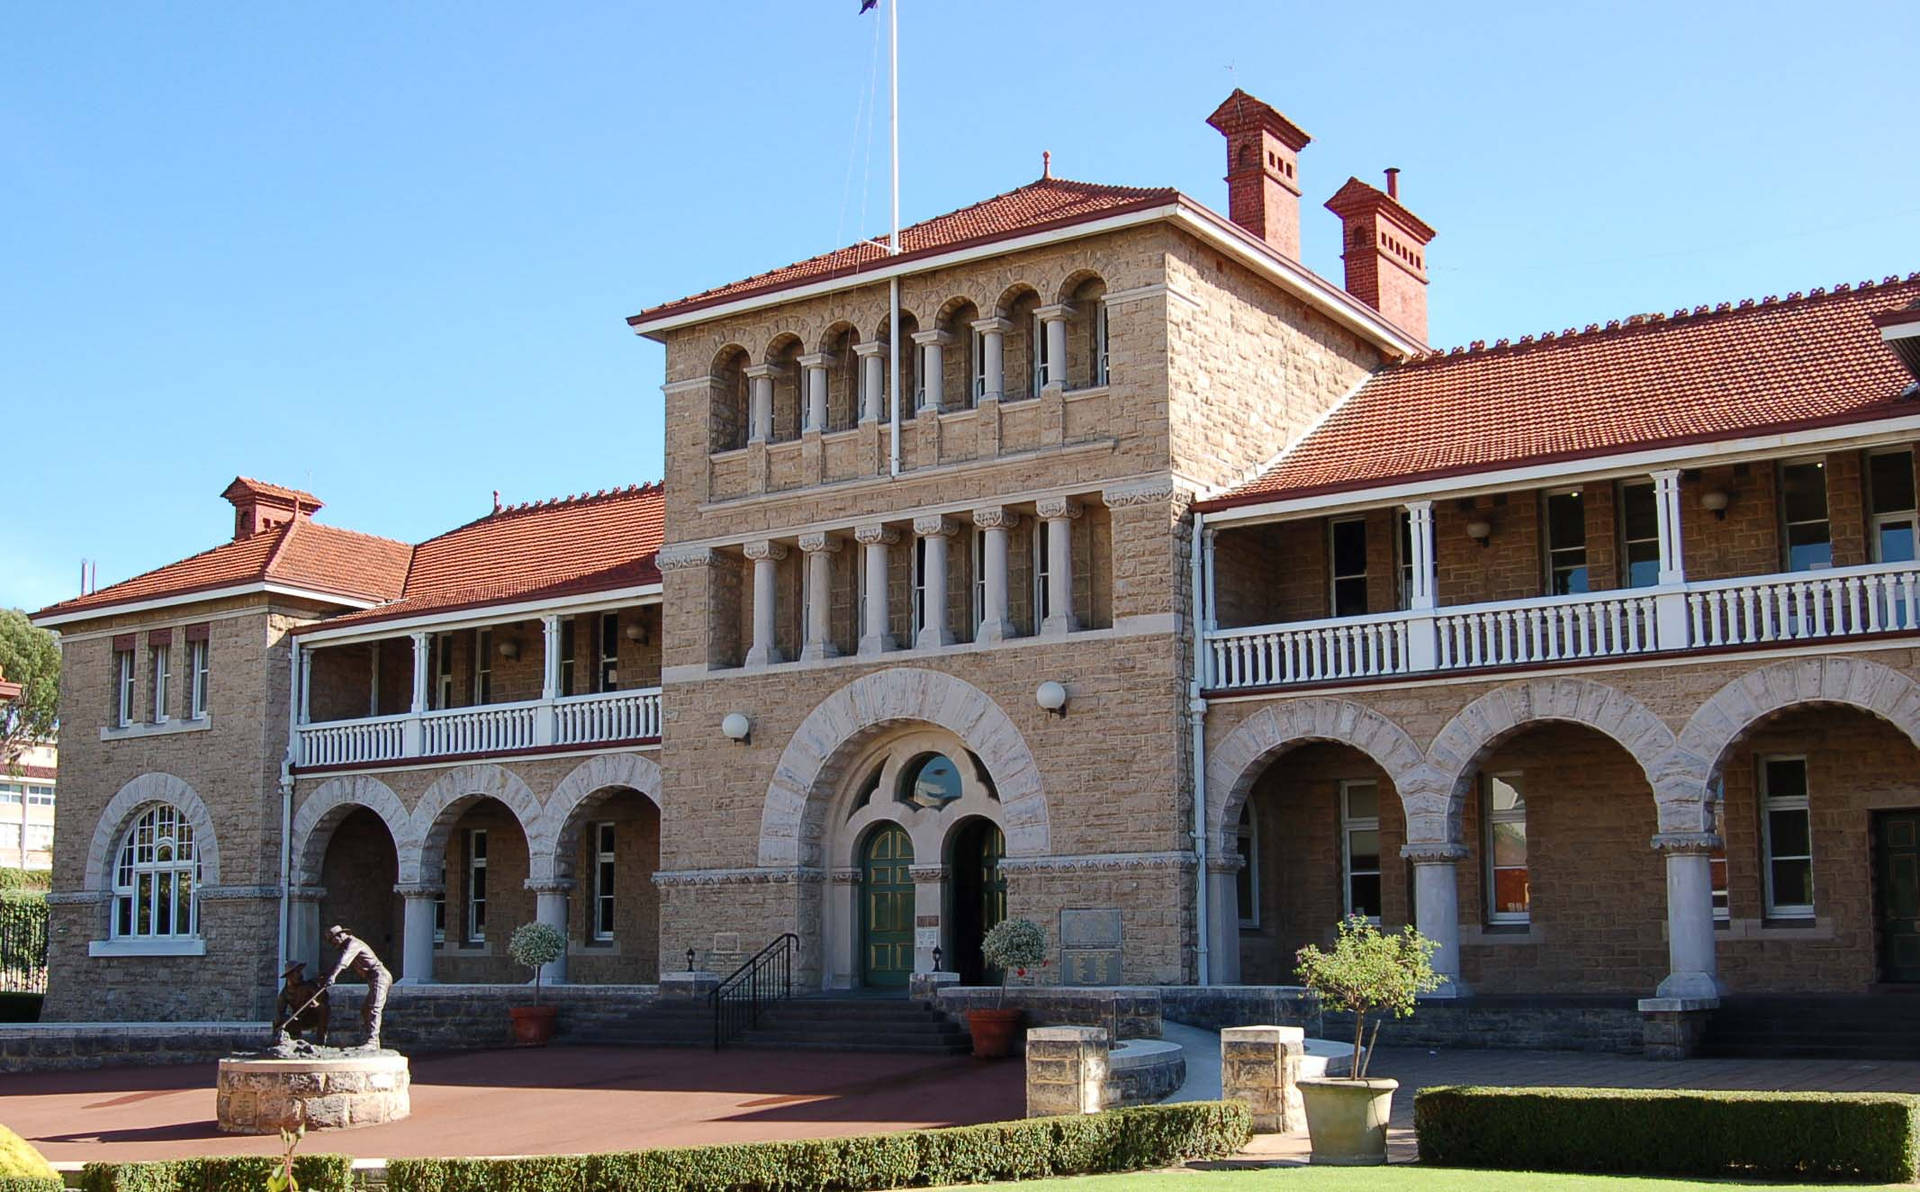 The Perth Mint Background